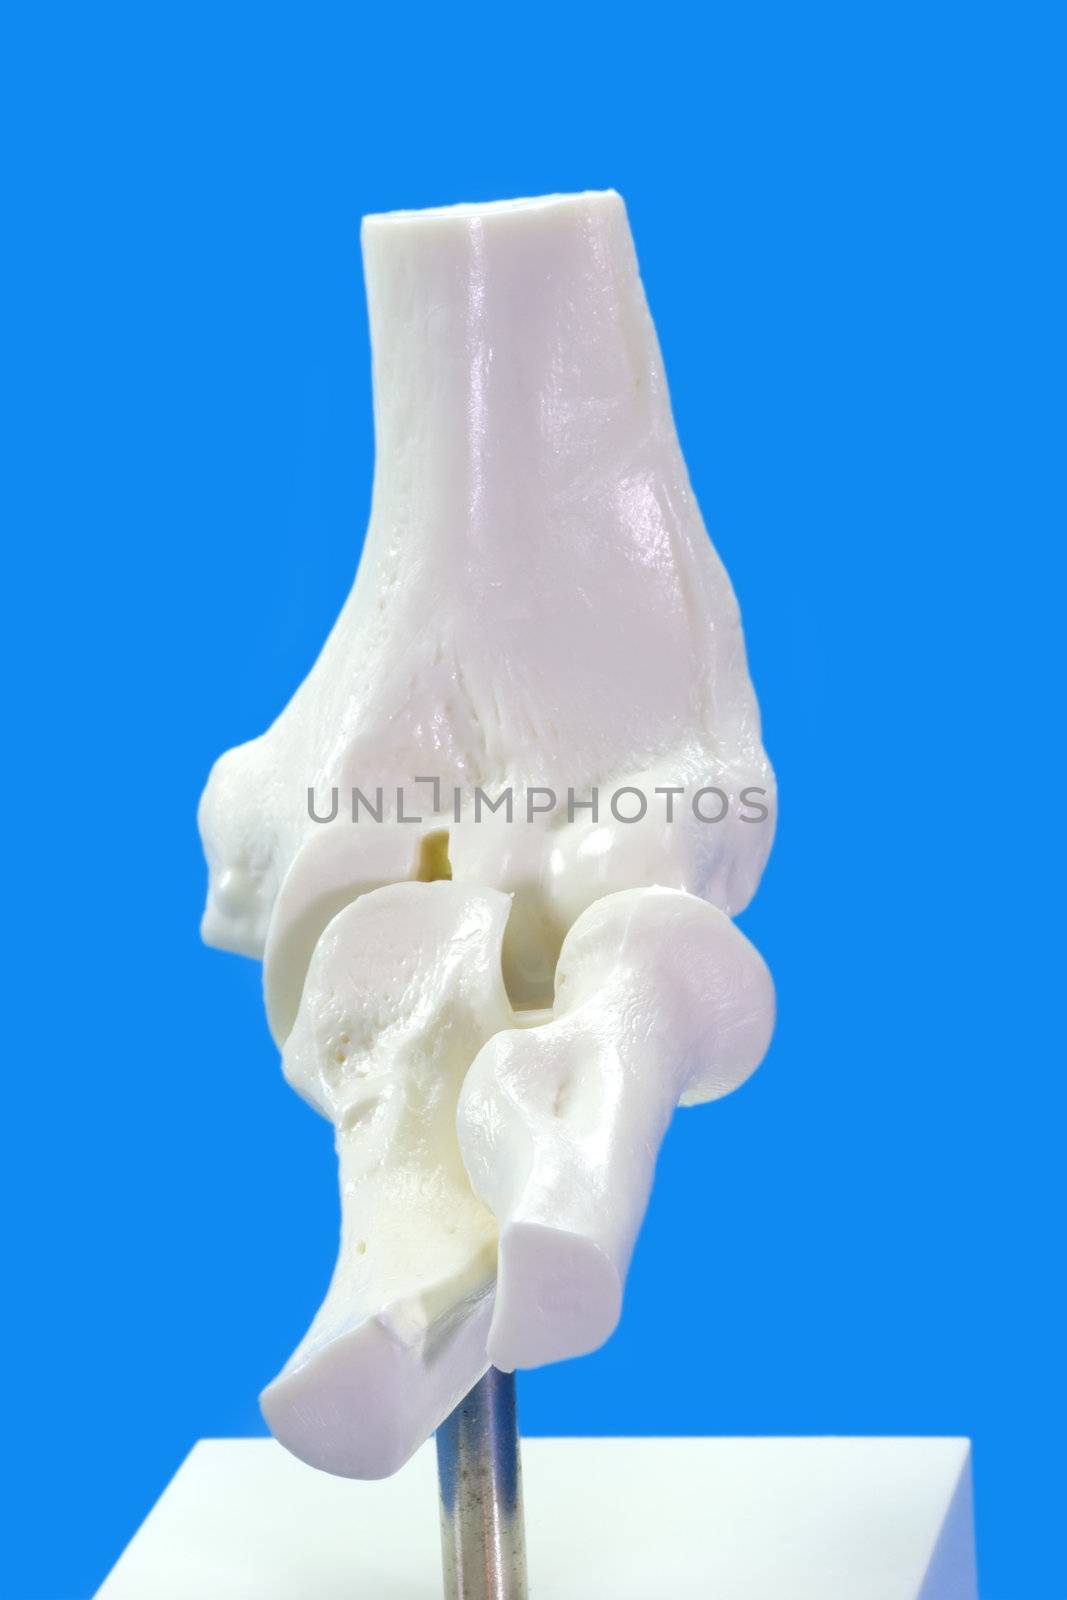 
Anatomy model from human elbow on blue background